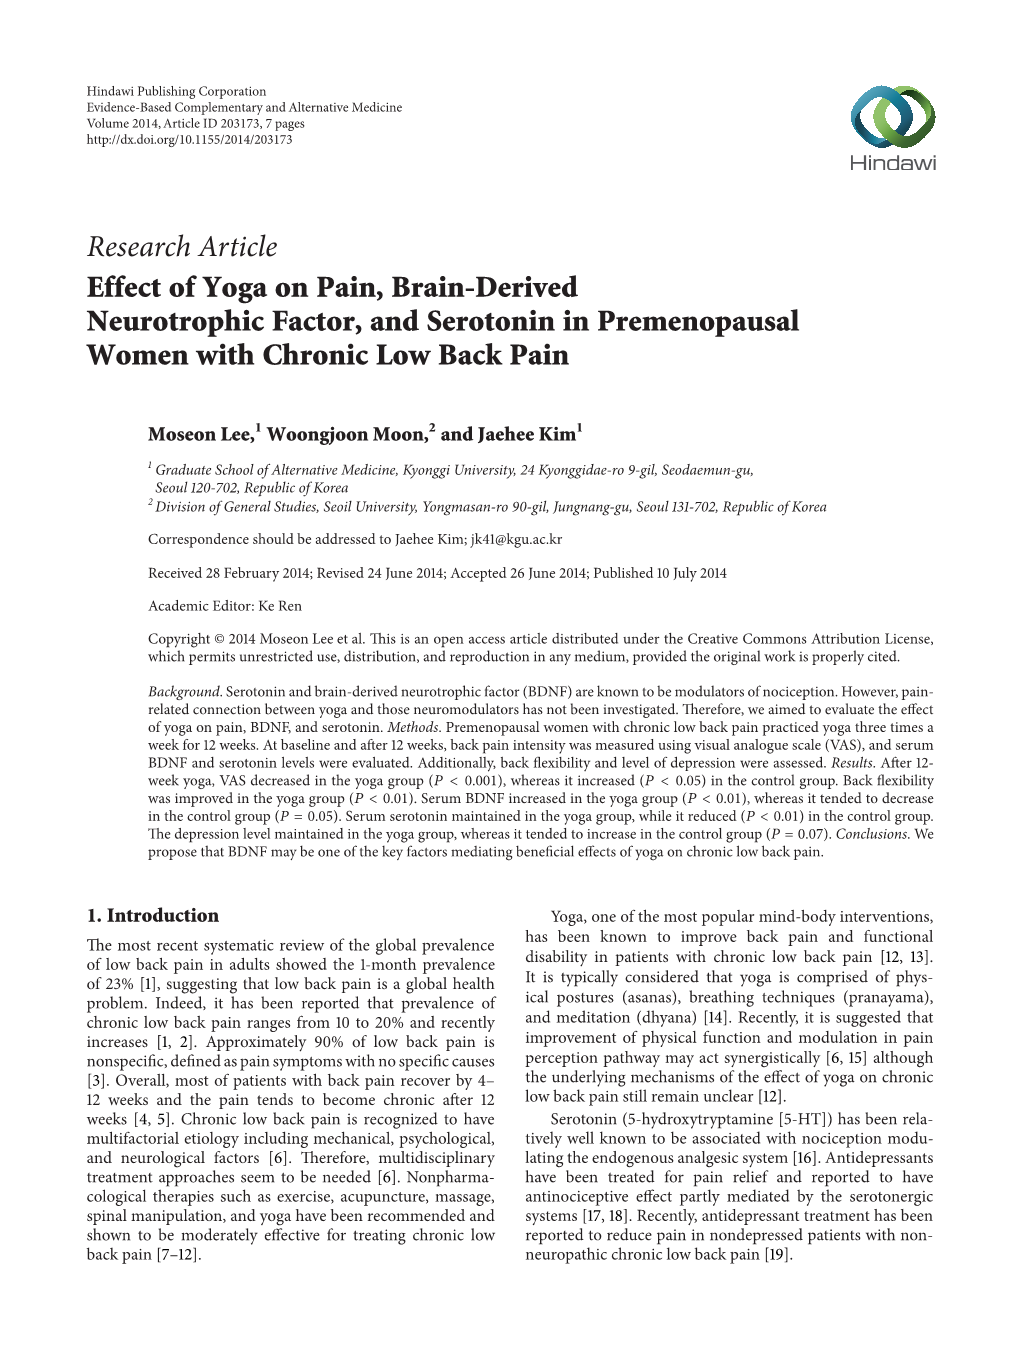 Research Article Effect of Yoga on Pain, Brain-Derived Neurotrophic Factor, and Serotonin in Premenopausal Women with Chronic Low Back Pain